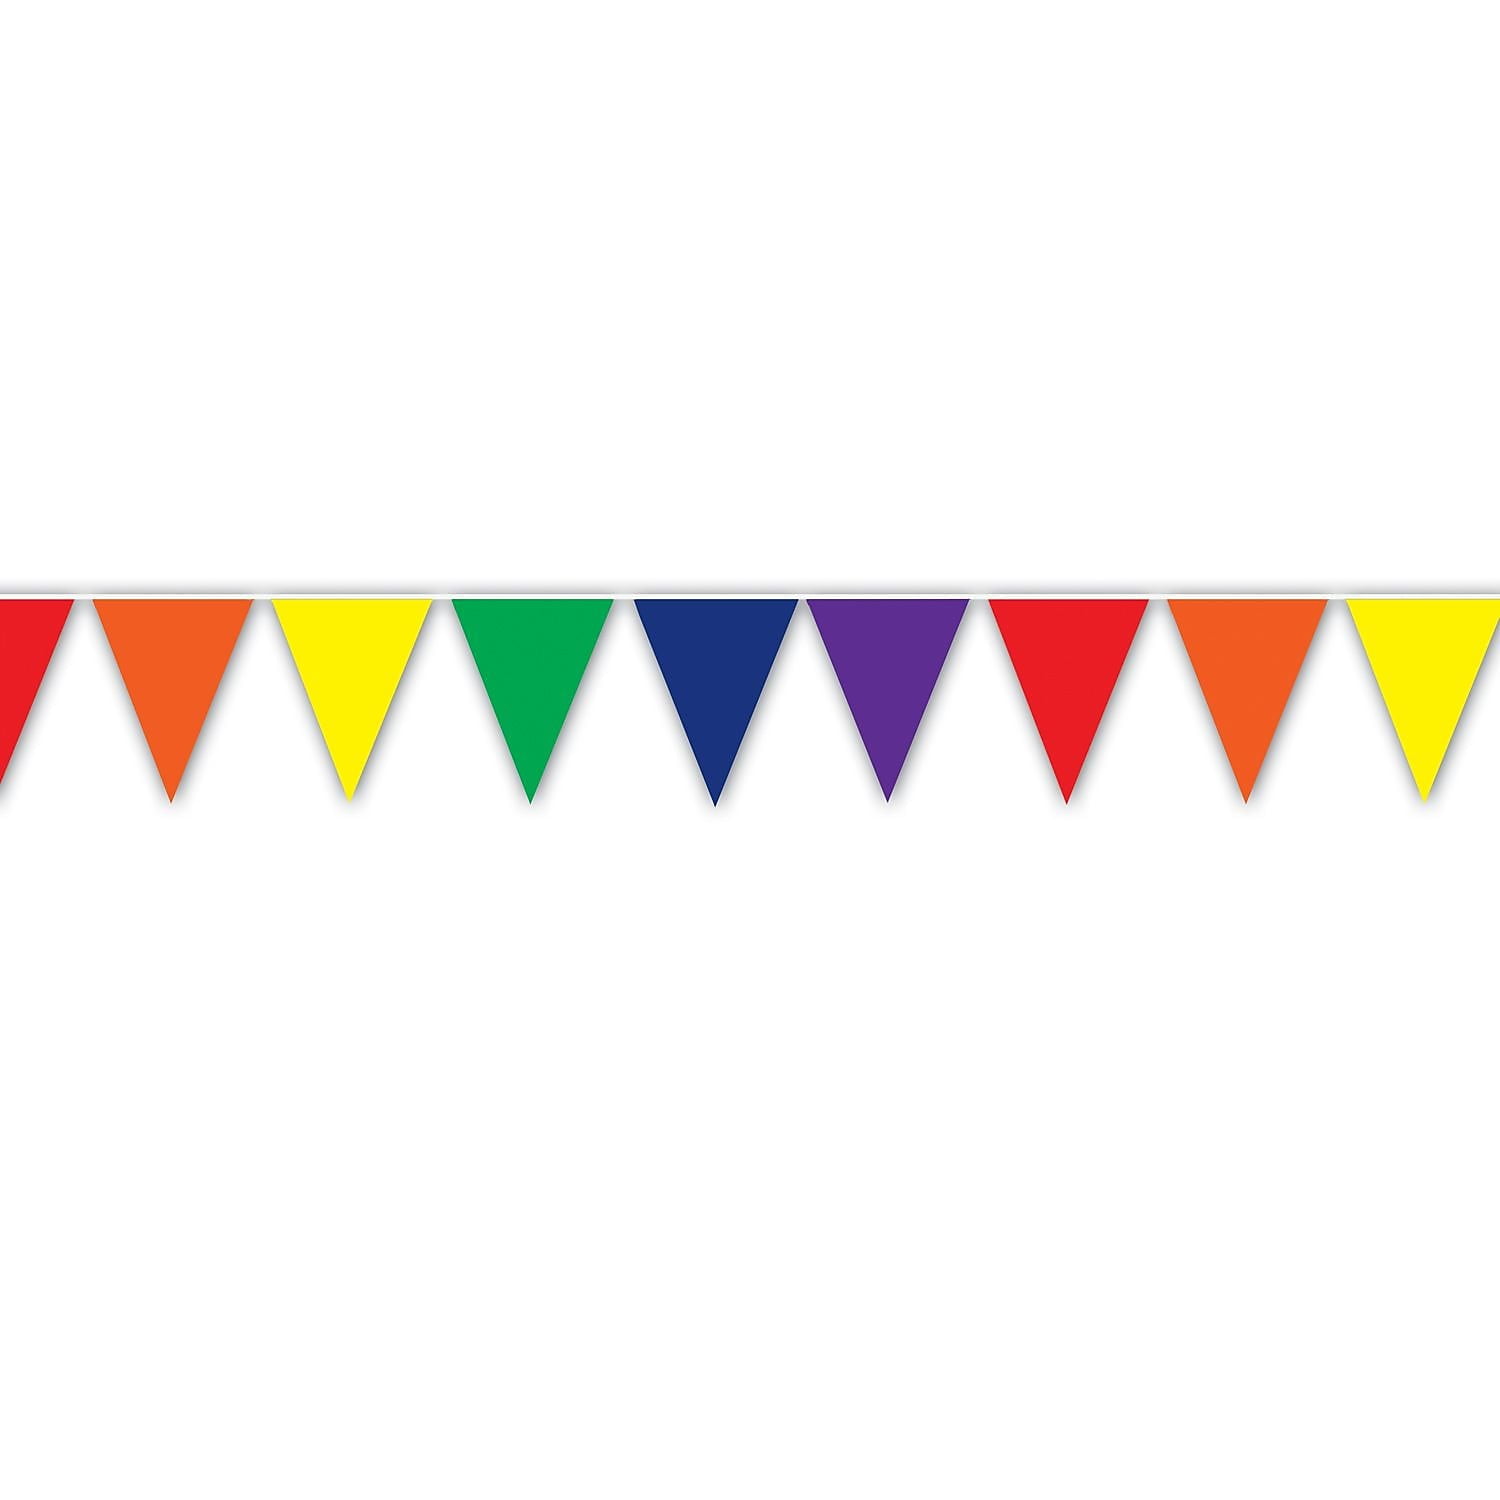 POPCORN RAINBOW FADE Banner Sign NEW XXL Size Best Quality for the $$$$ 